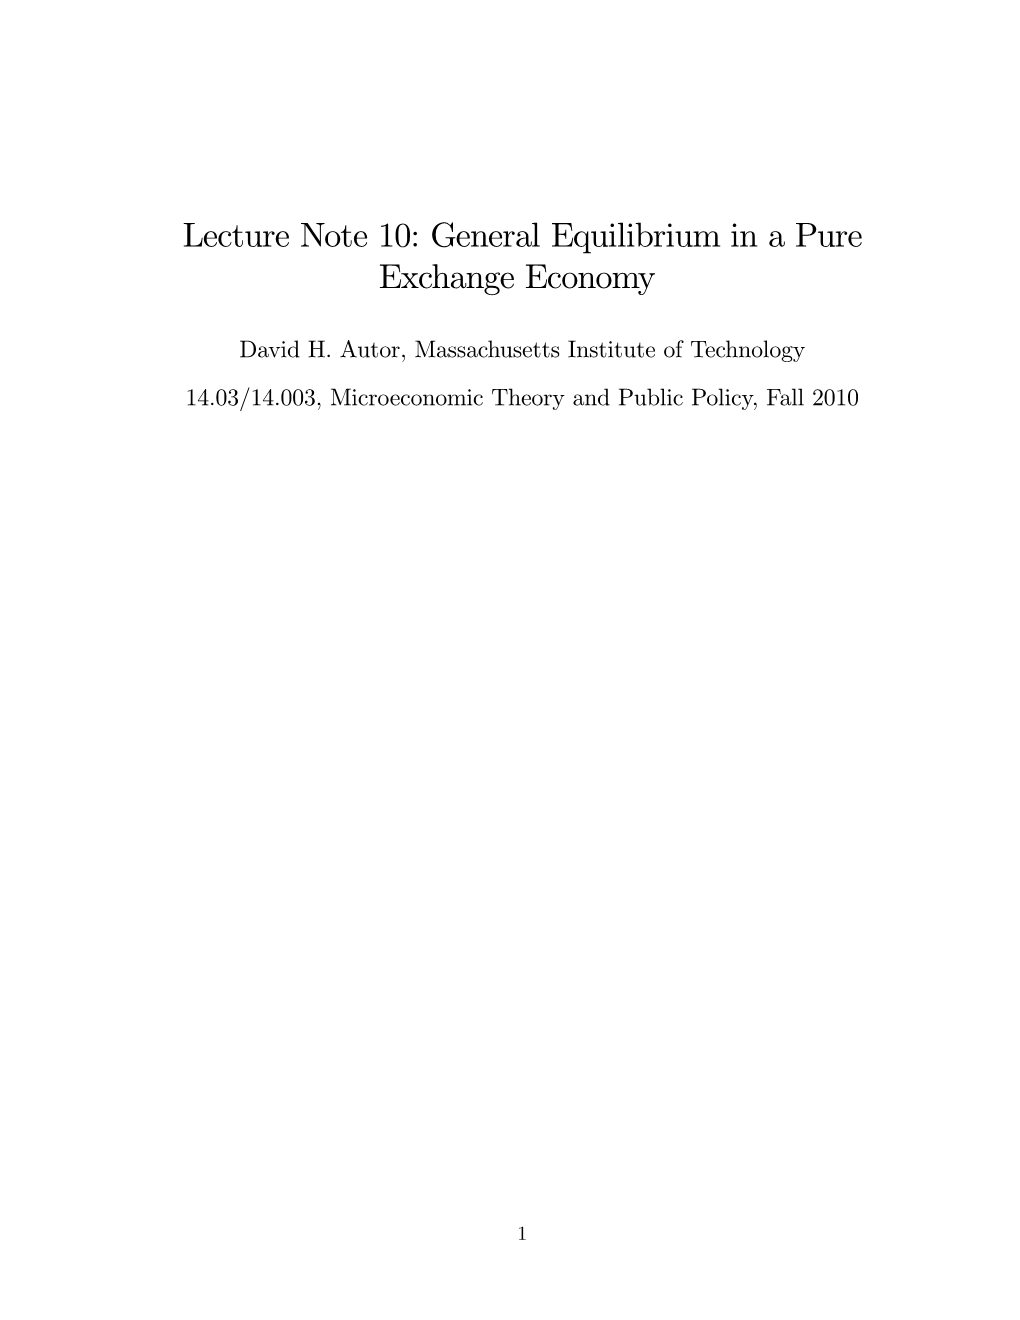 Lecture Note 10: General Equilibrium in a Pure Exchange Economy